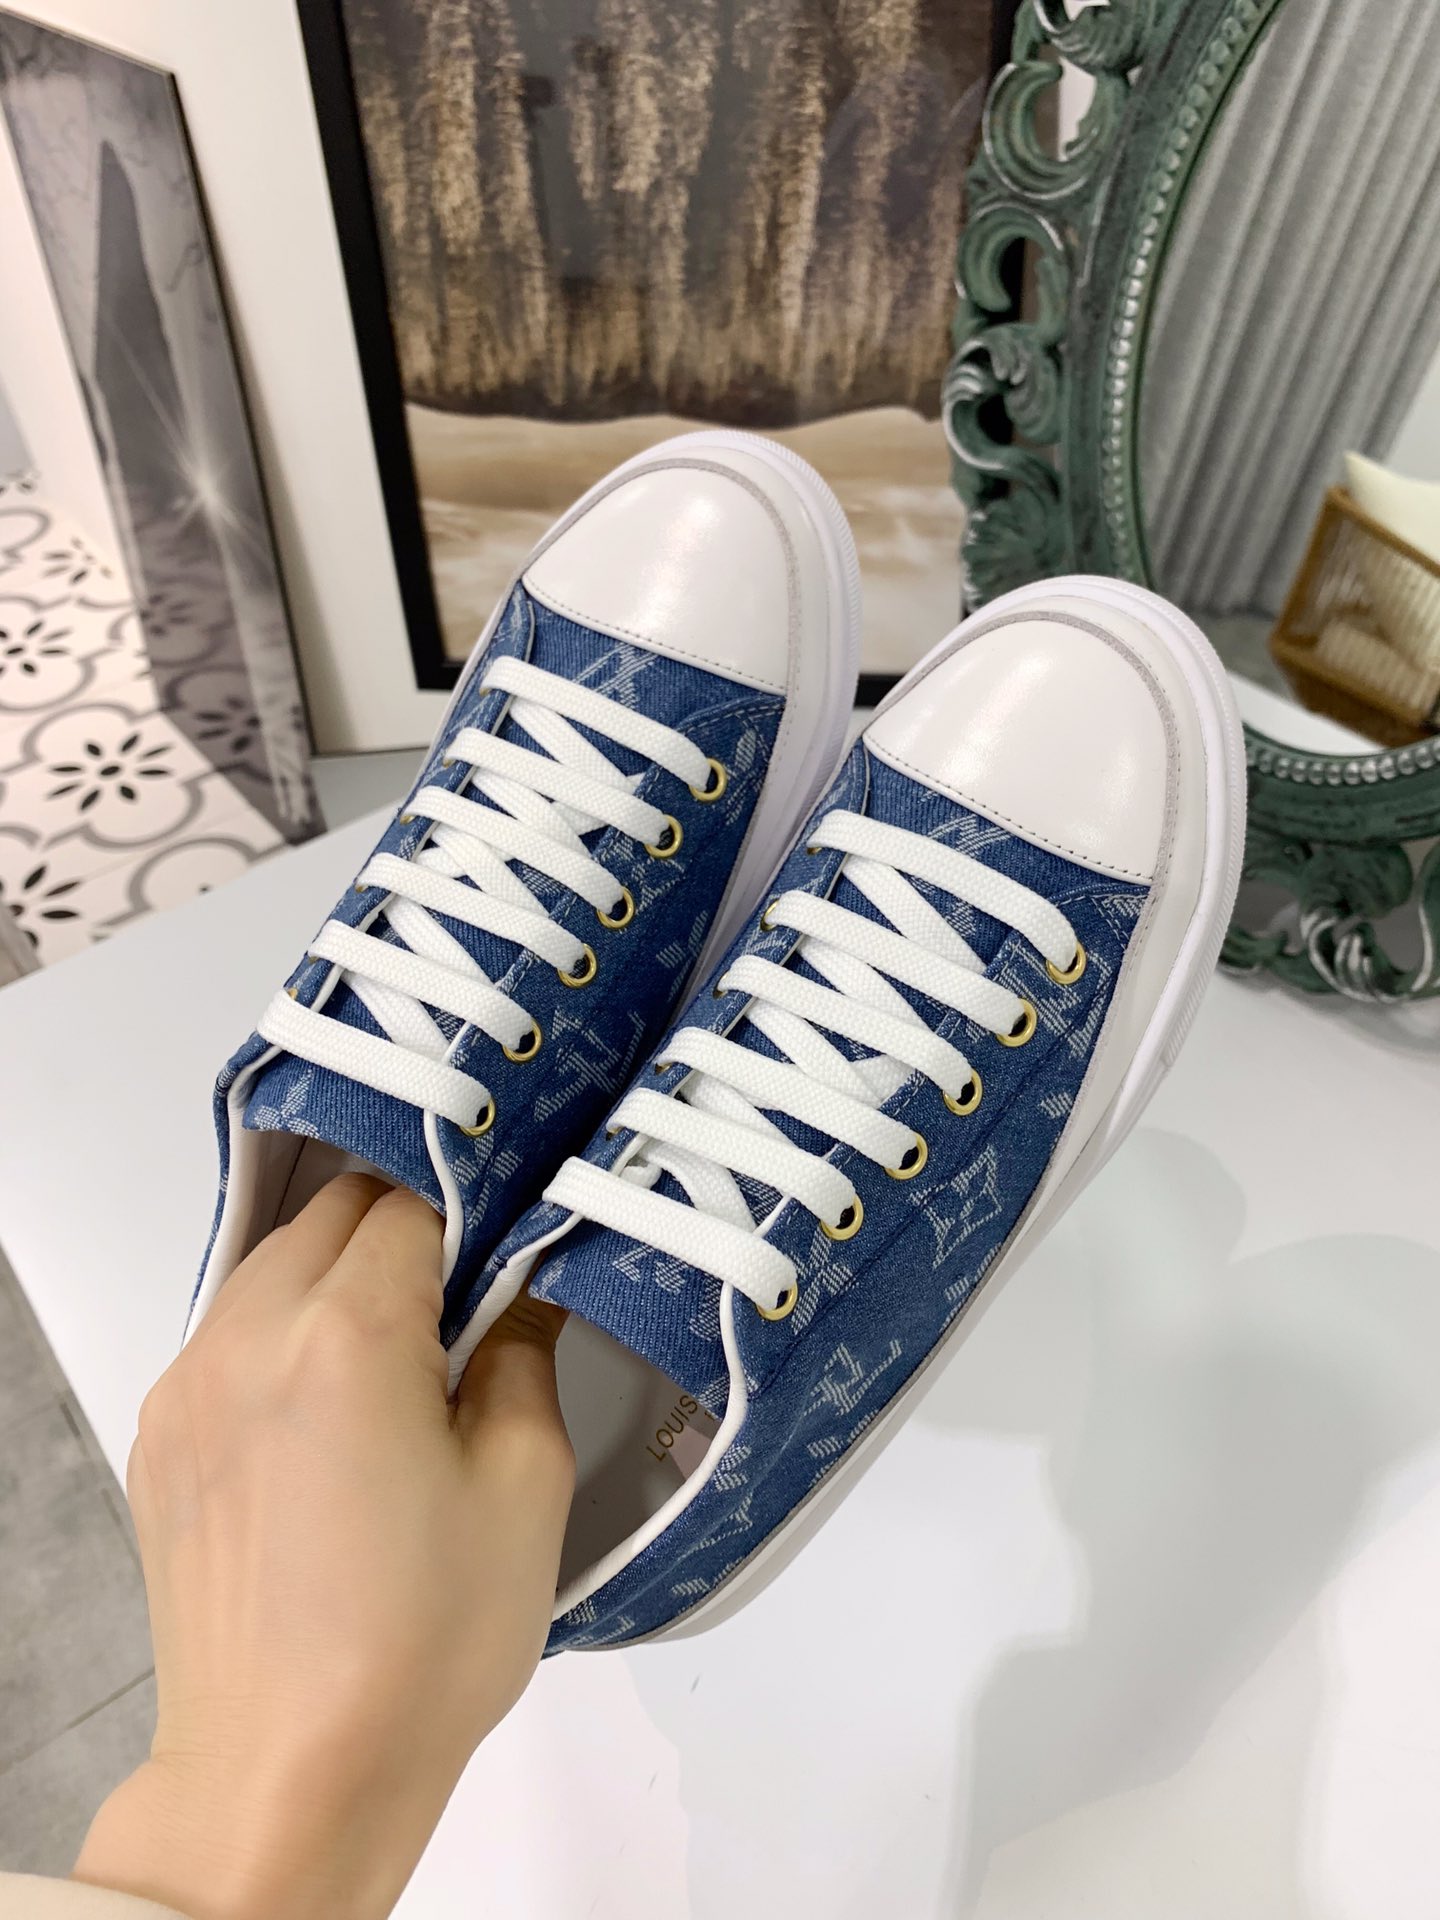 Louis Vuitton Luxury
 Shoes Sneakers AAAA Customize
 Blue Rose White Denim Rubber Spring/Summer Collection Sweatpants